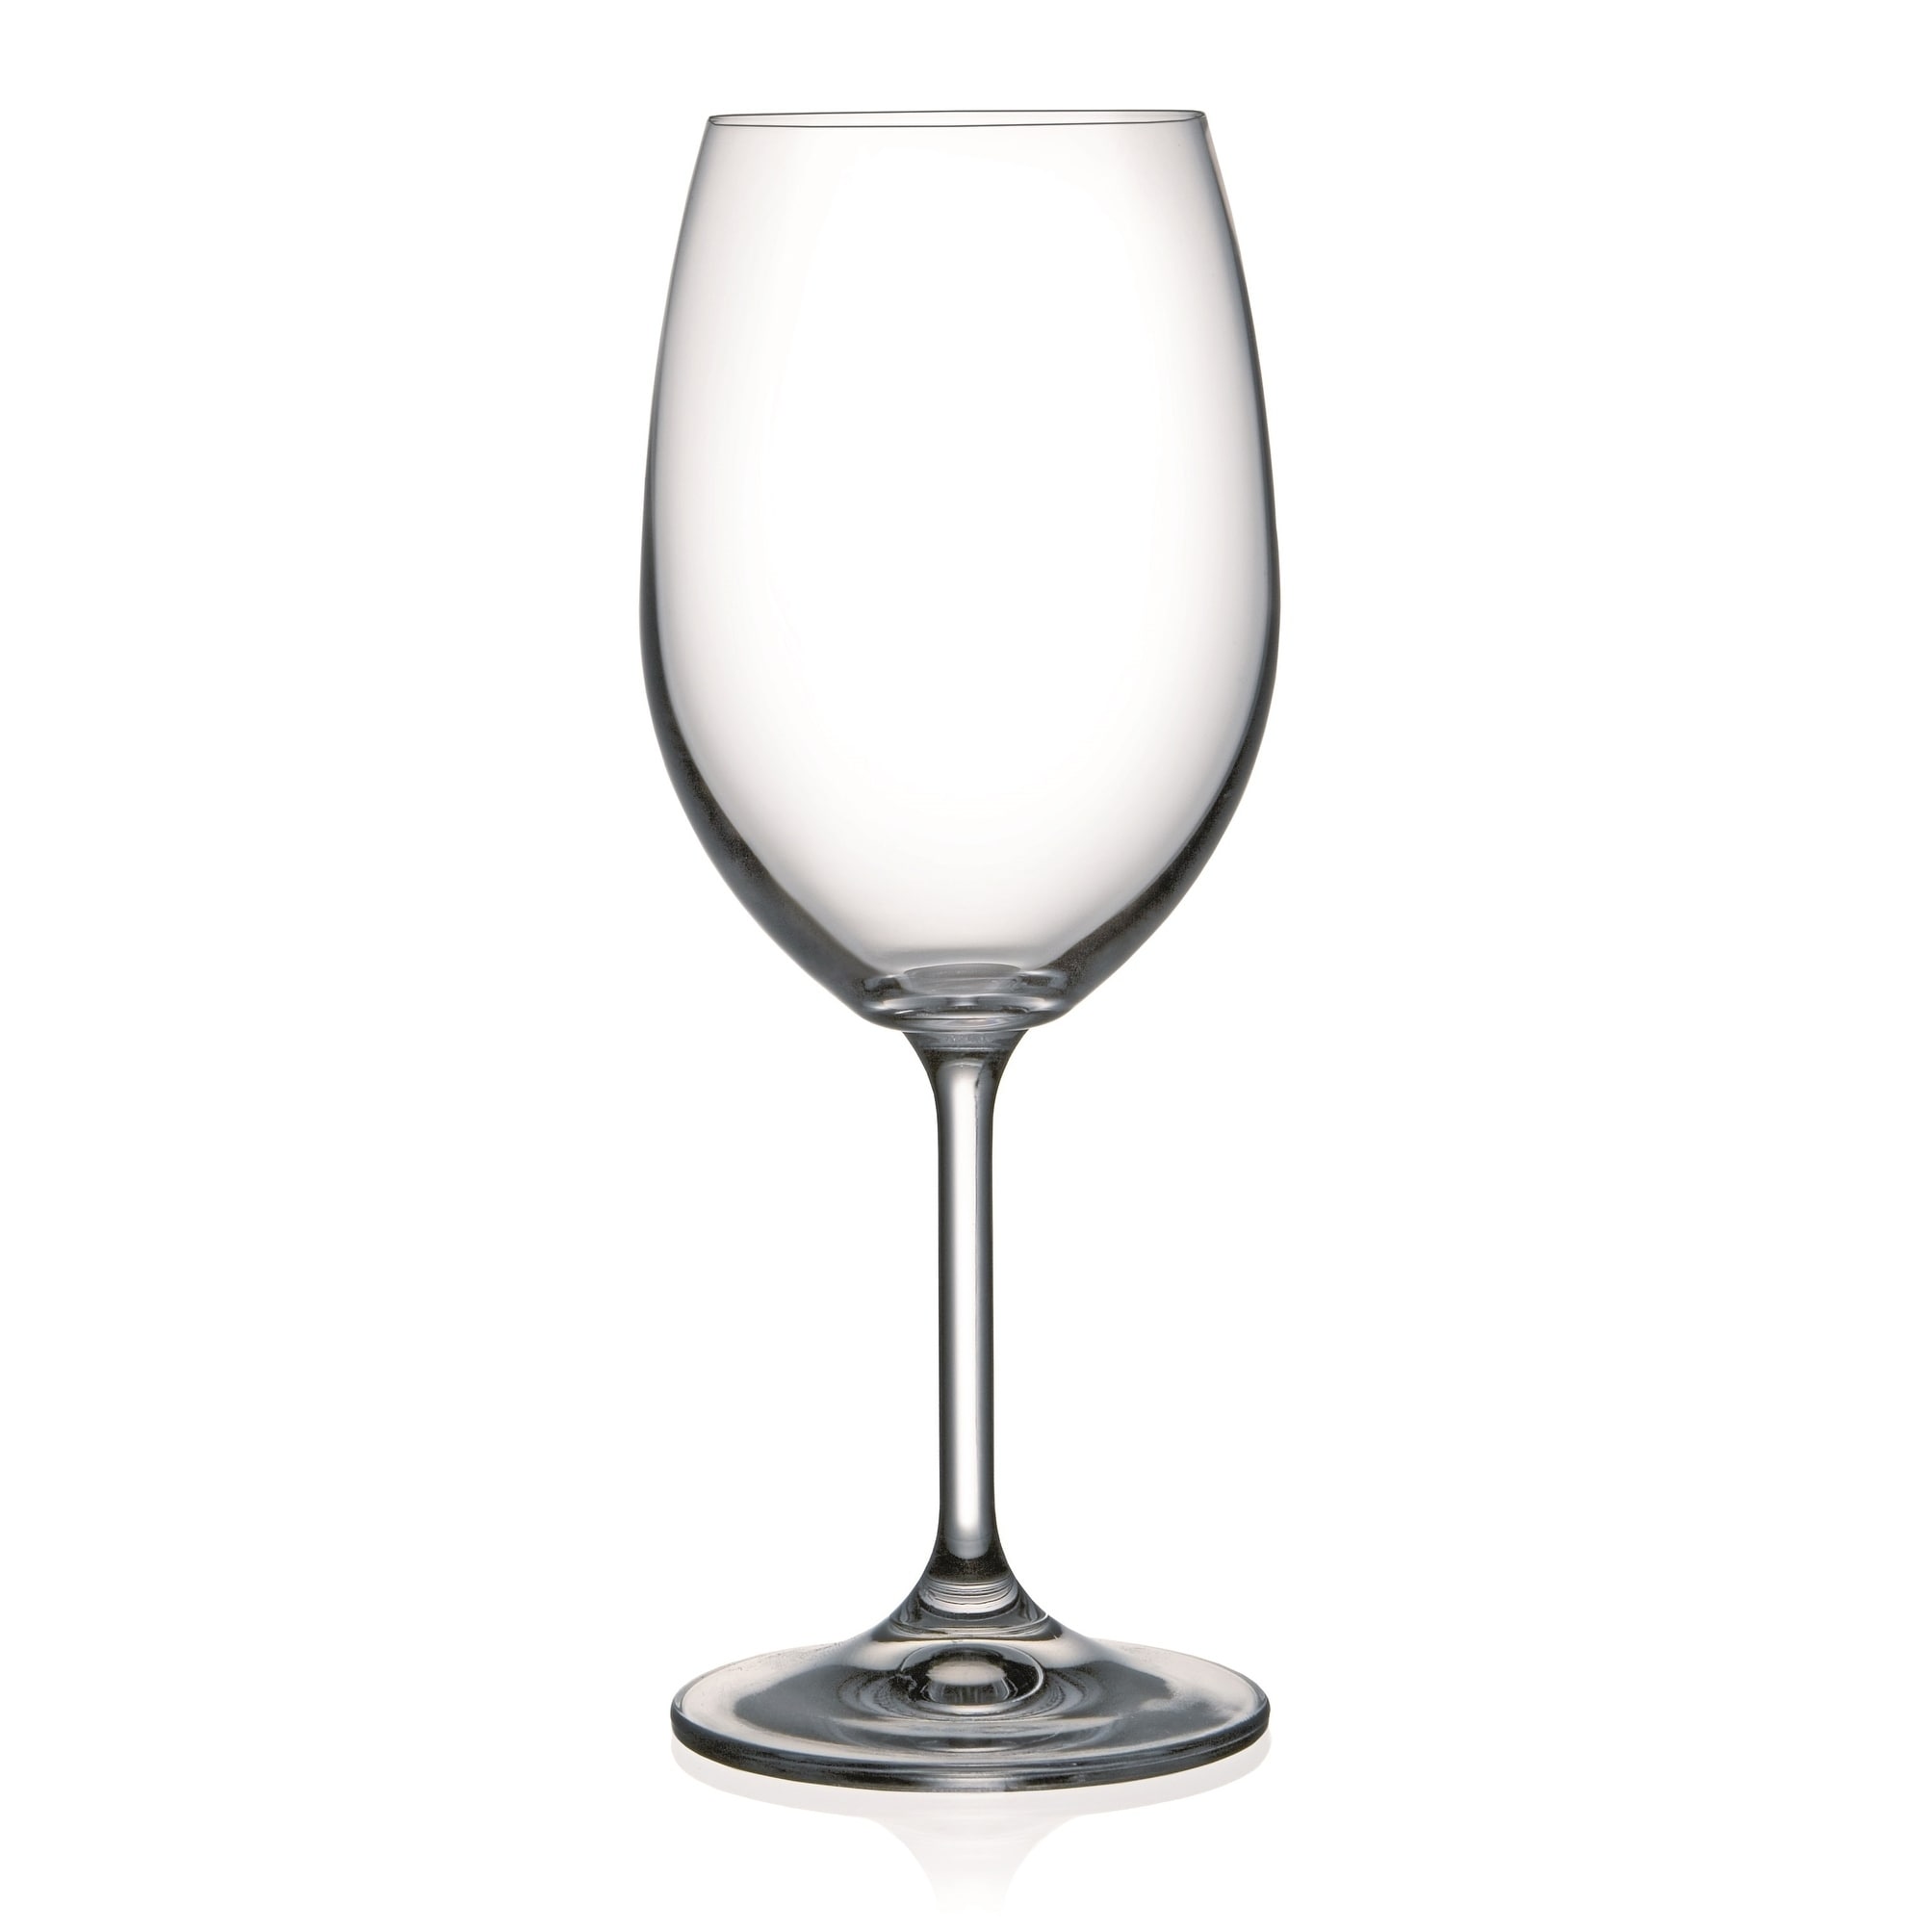 https://ak1.ostkcdn.com/images/products/29197152/Majestic-Gifts-Inc.-Set-6-Classic-Clear-White-Wine-Glass-15.5-oz.-Made-in-Europe-11c98284-f650-4bc2-a2c4-effad7c692fa.jpg